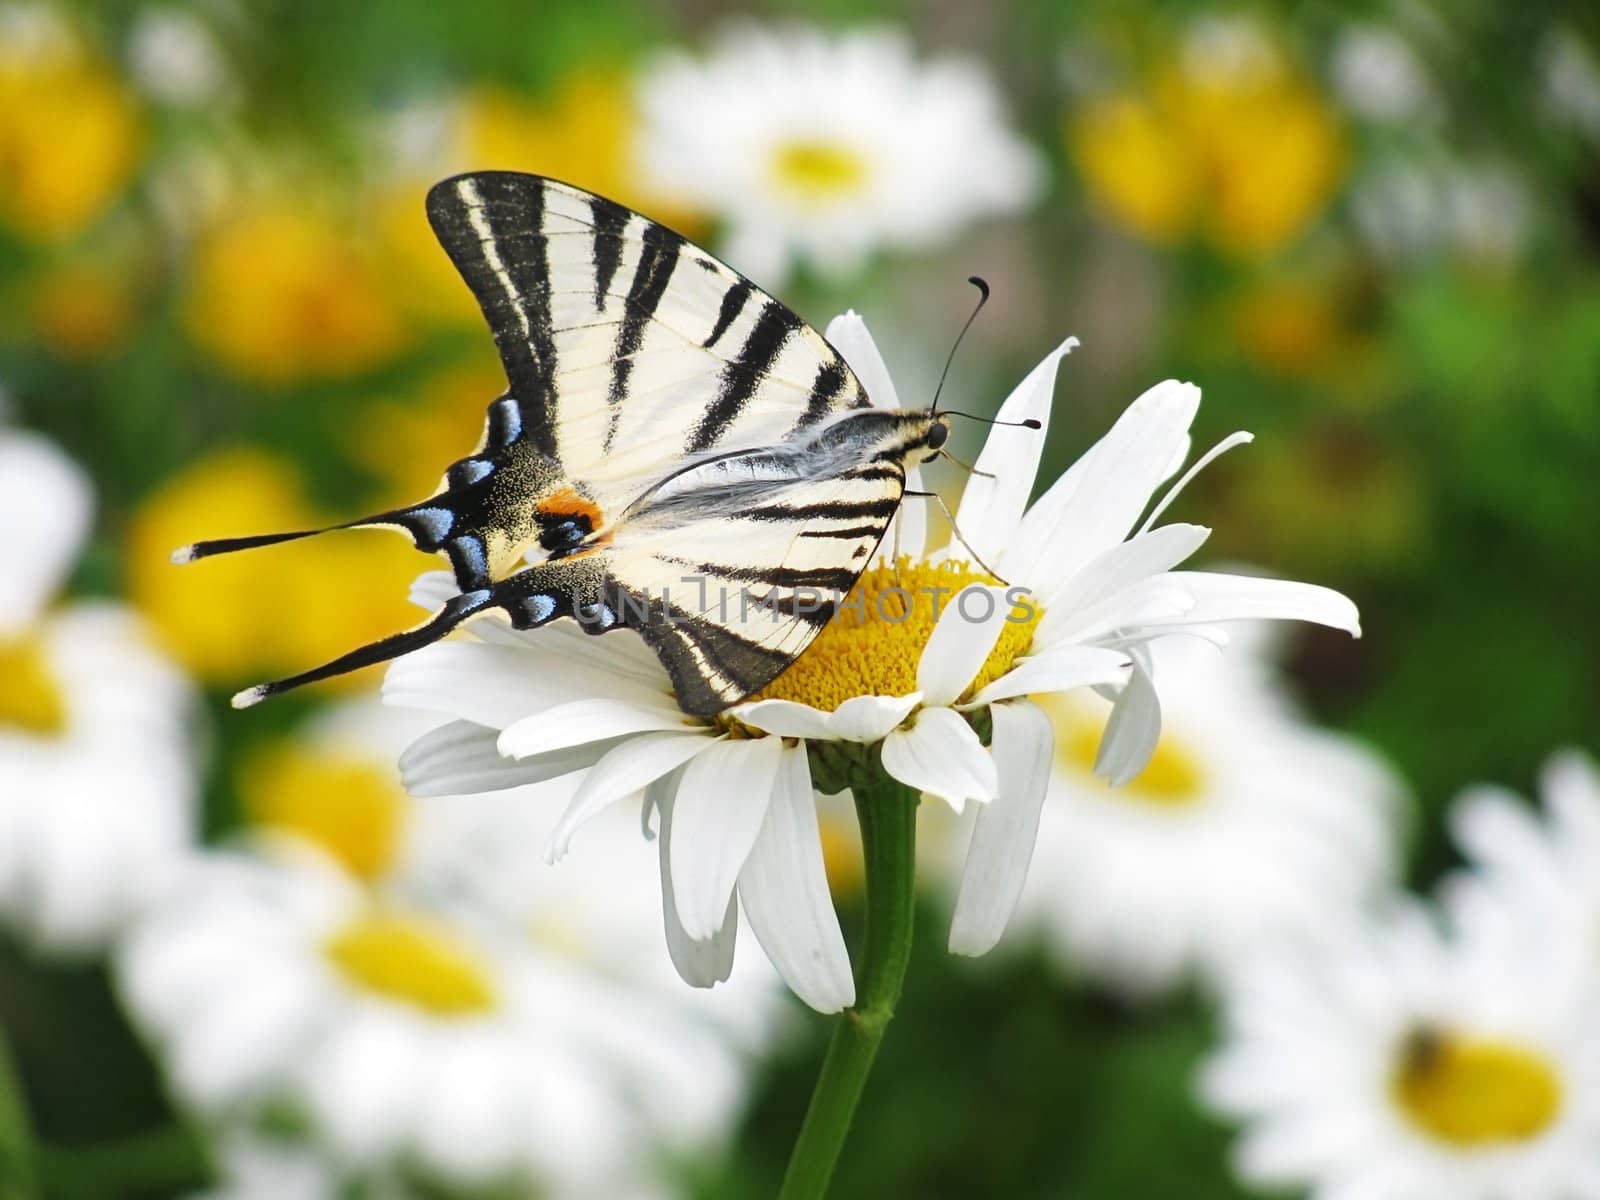 butterfly (Scarce Swallowtail) on flower (camomile)